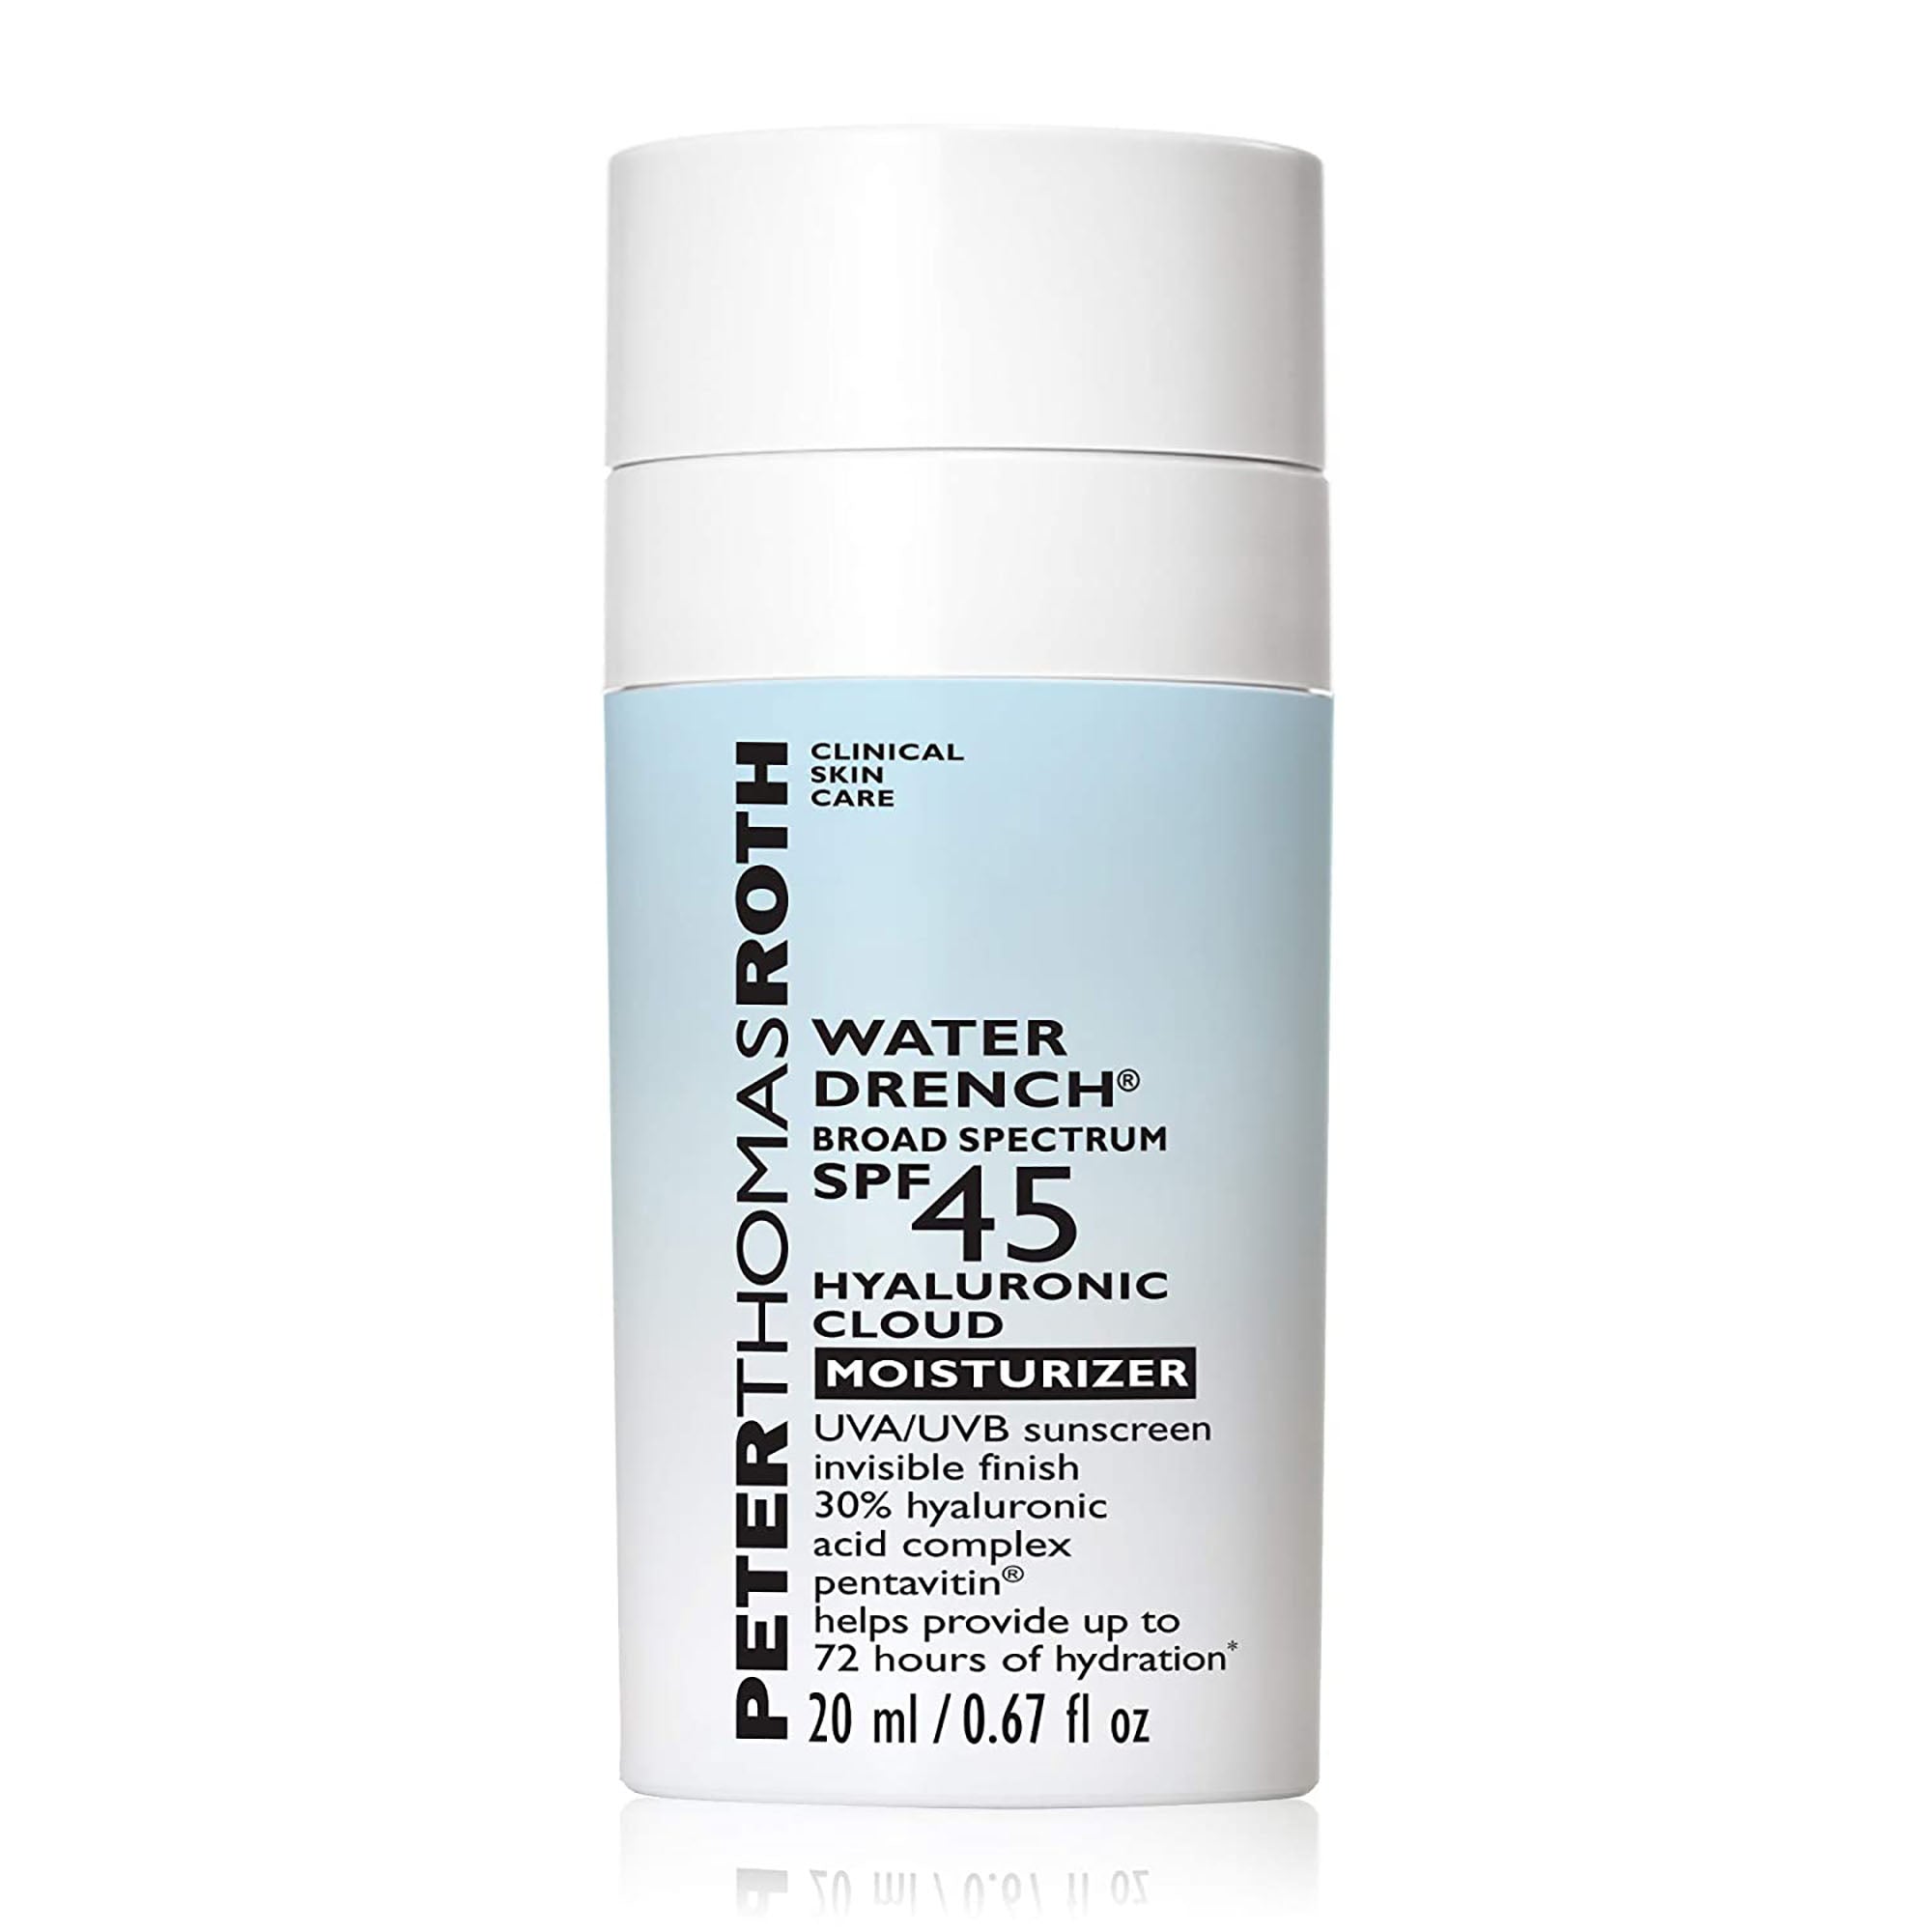 Water Drench SPF 45 Hyaluronic Cloud Moisturizer Travel Size / 0.67OZ